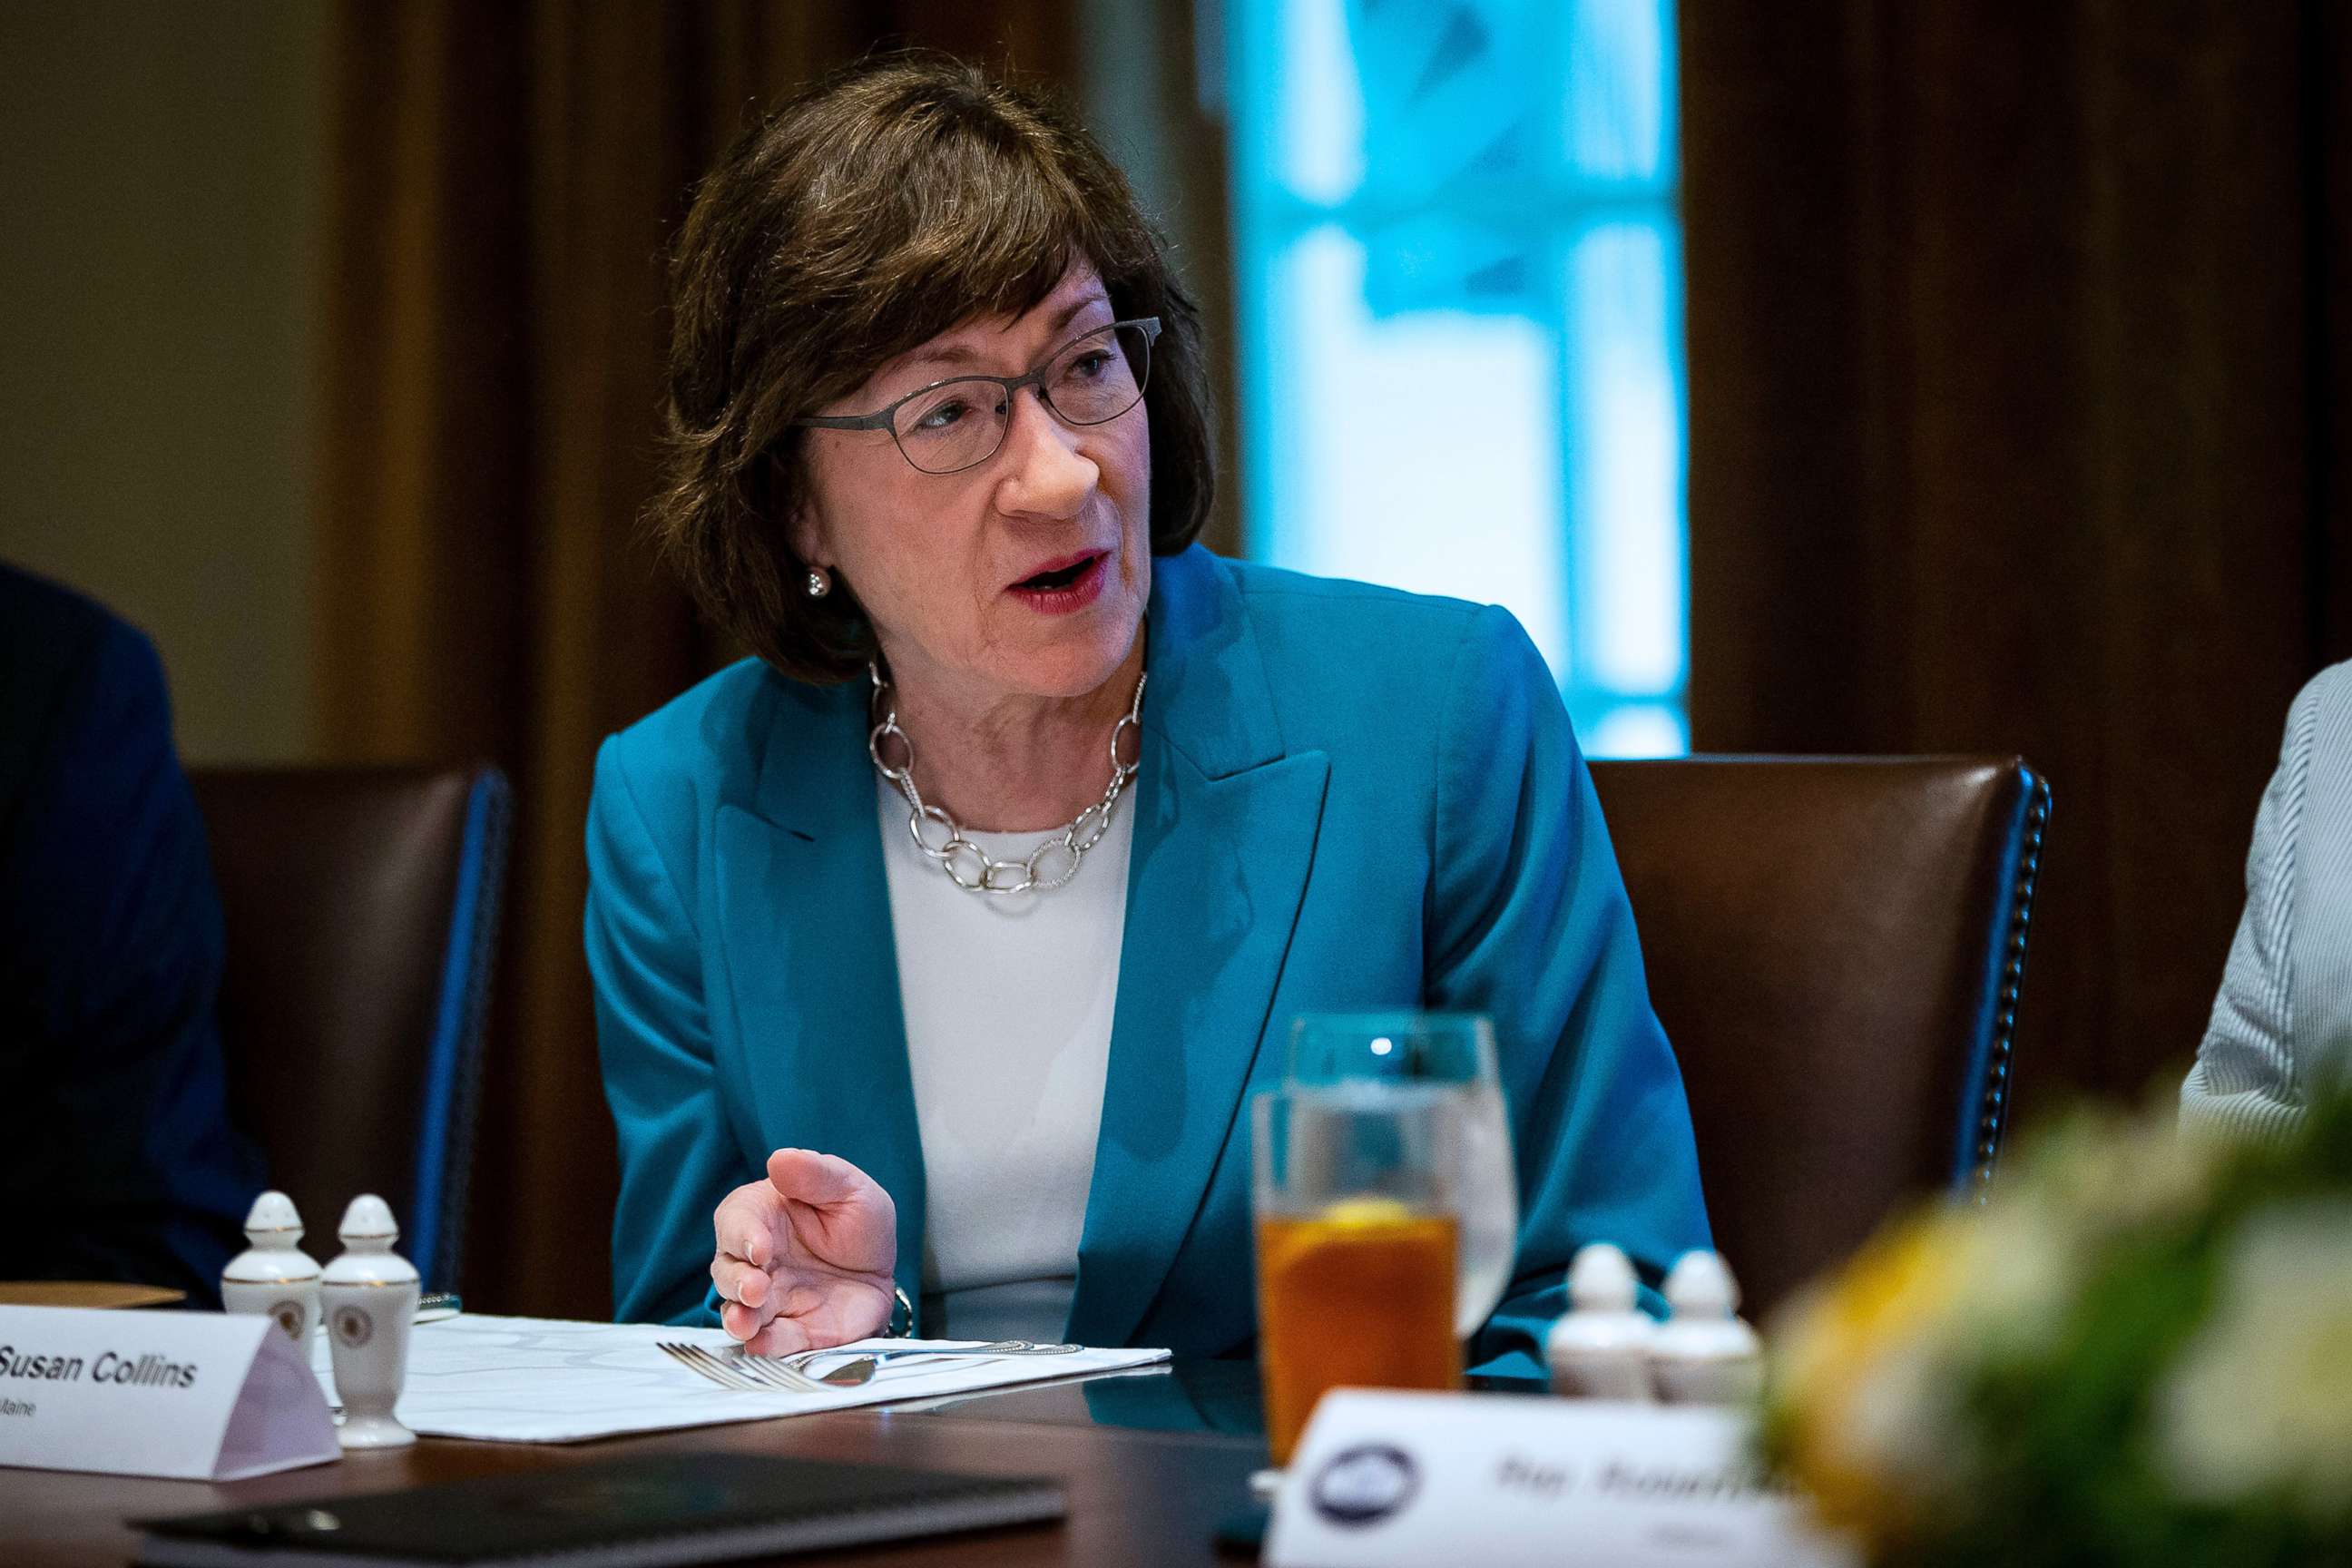 PHOTO: Senator Susan Collins attends a meeting with Republican lawmakers in the Cabinet Room at the White House in Washington, D.C., June 26, 2018